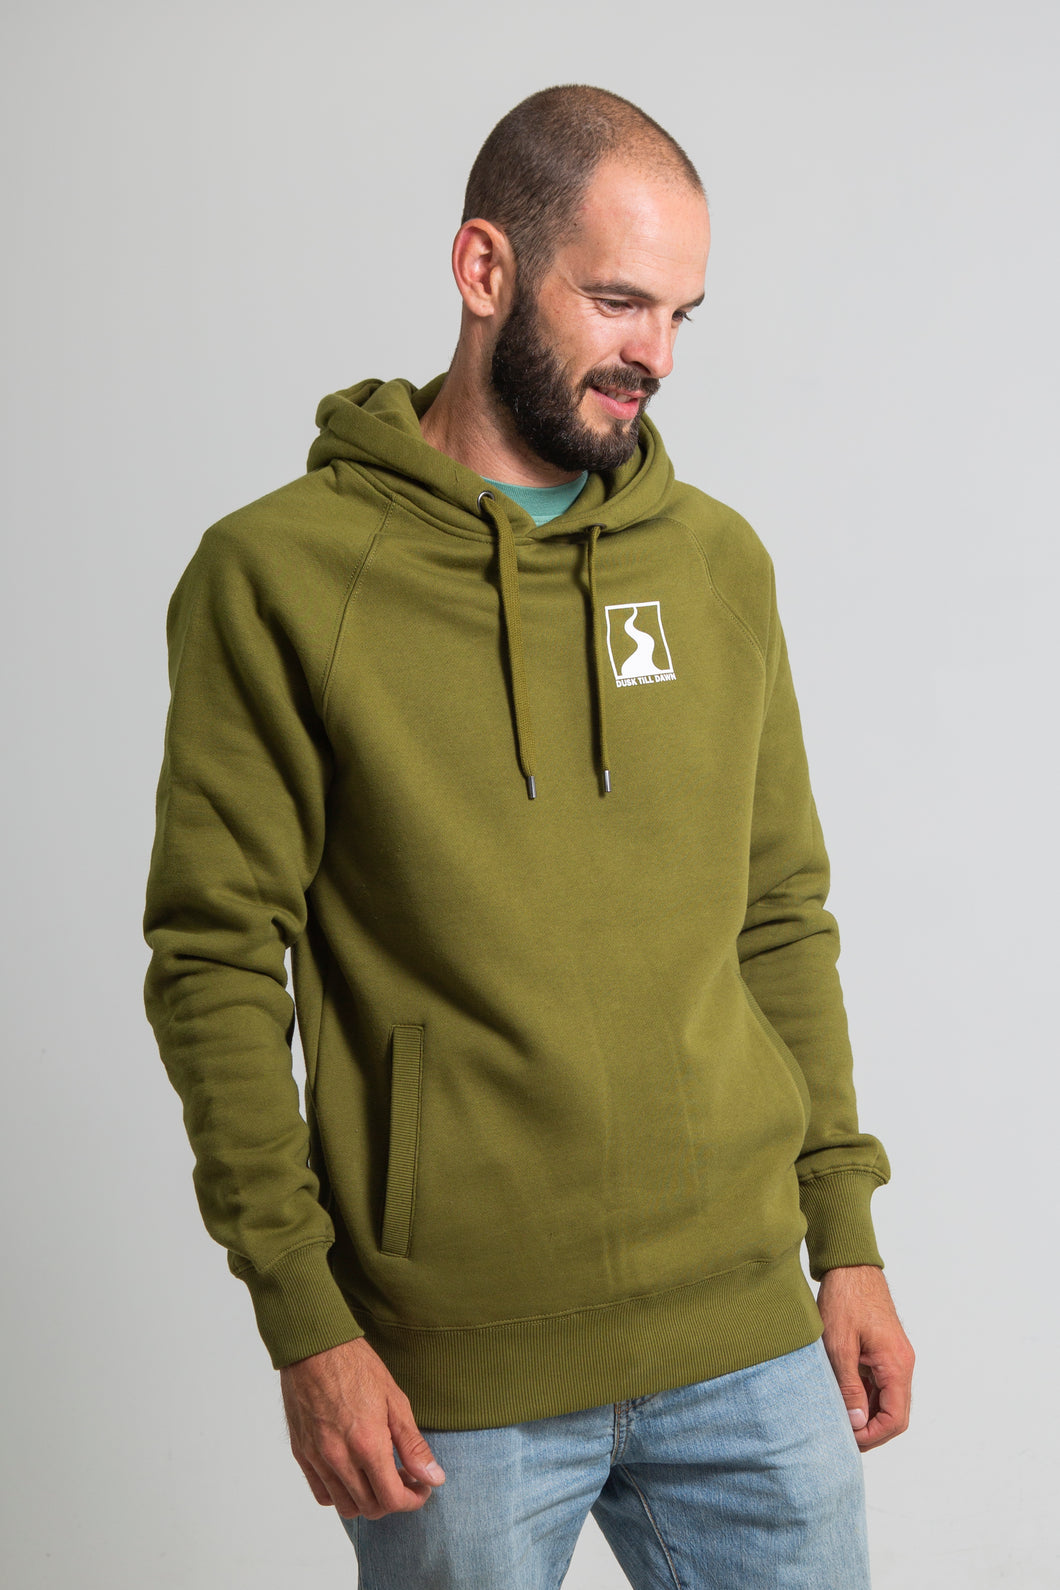 The Chase hoodie